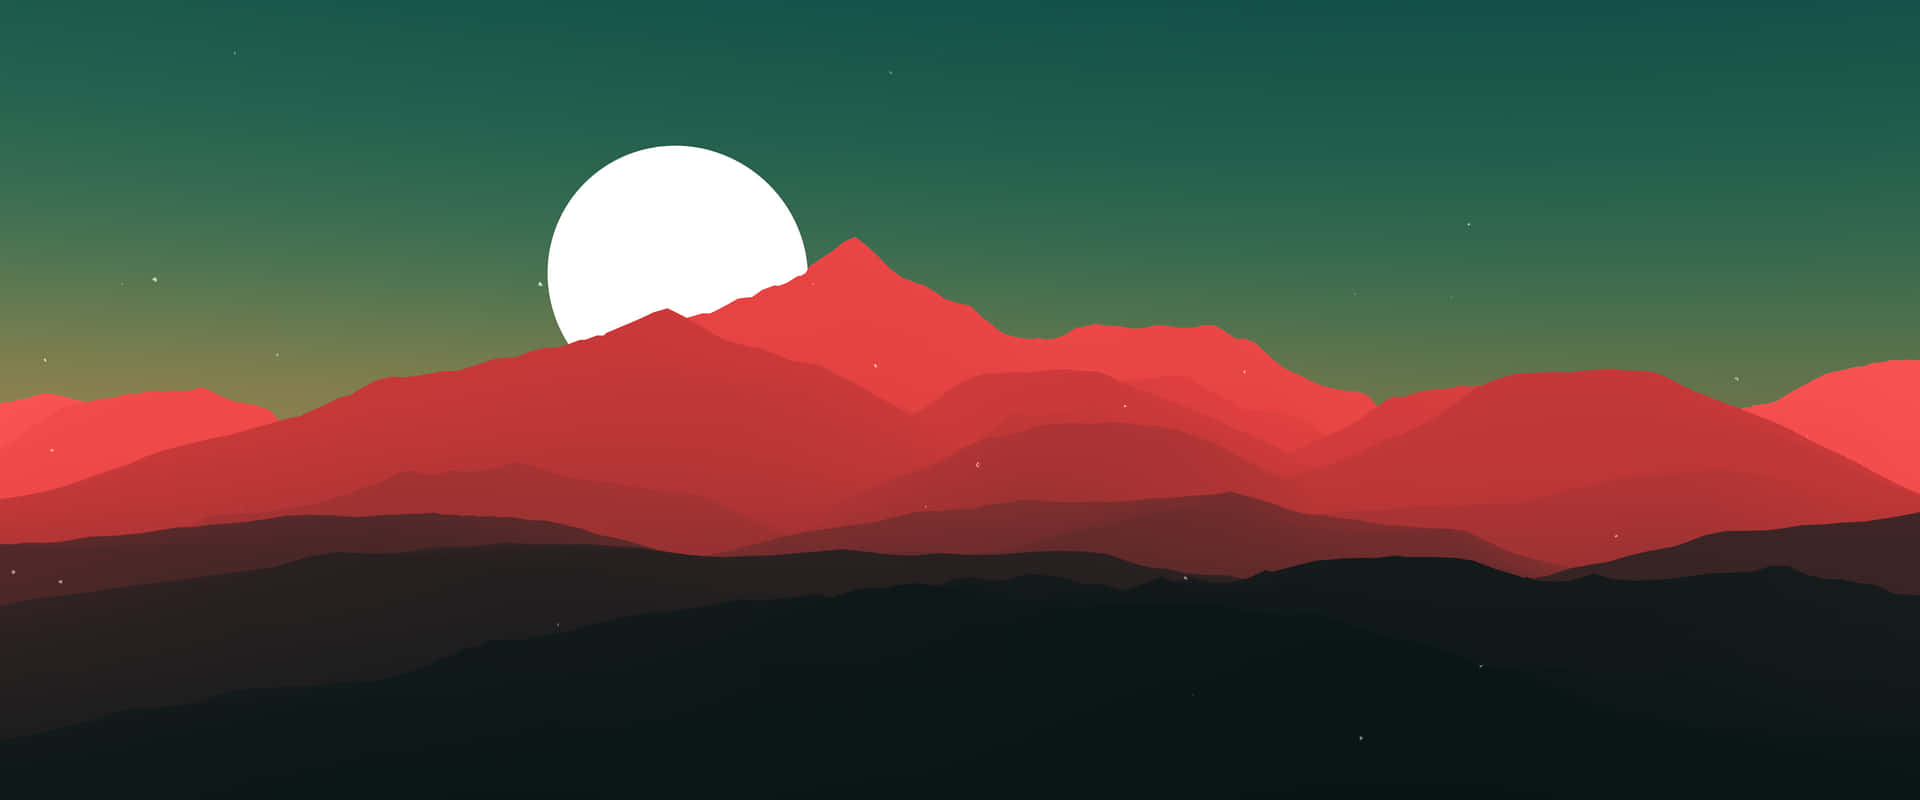 A Red And Green Mountain With A White Moon Wallpaper